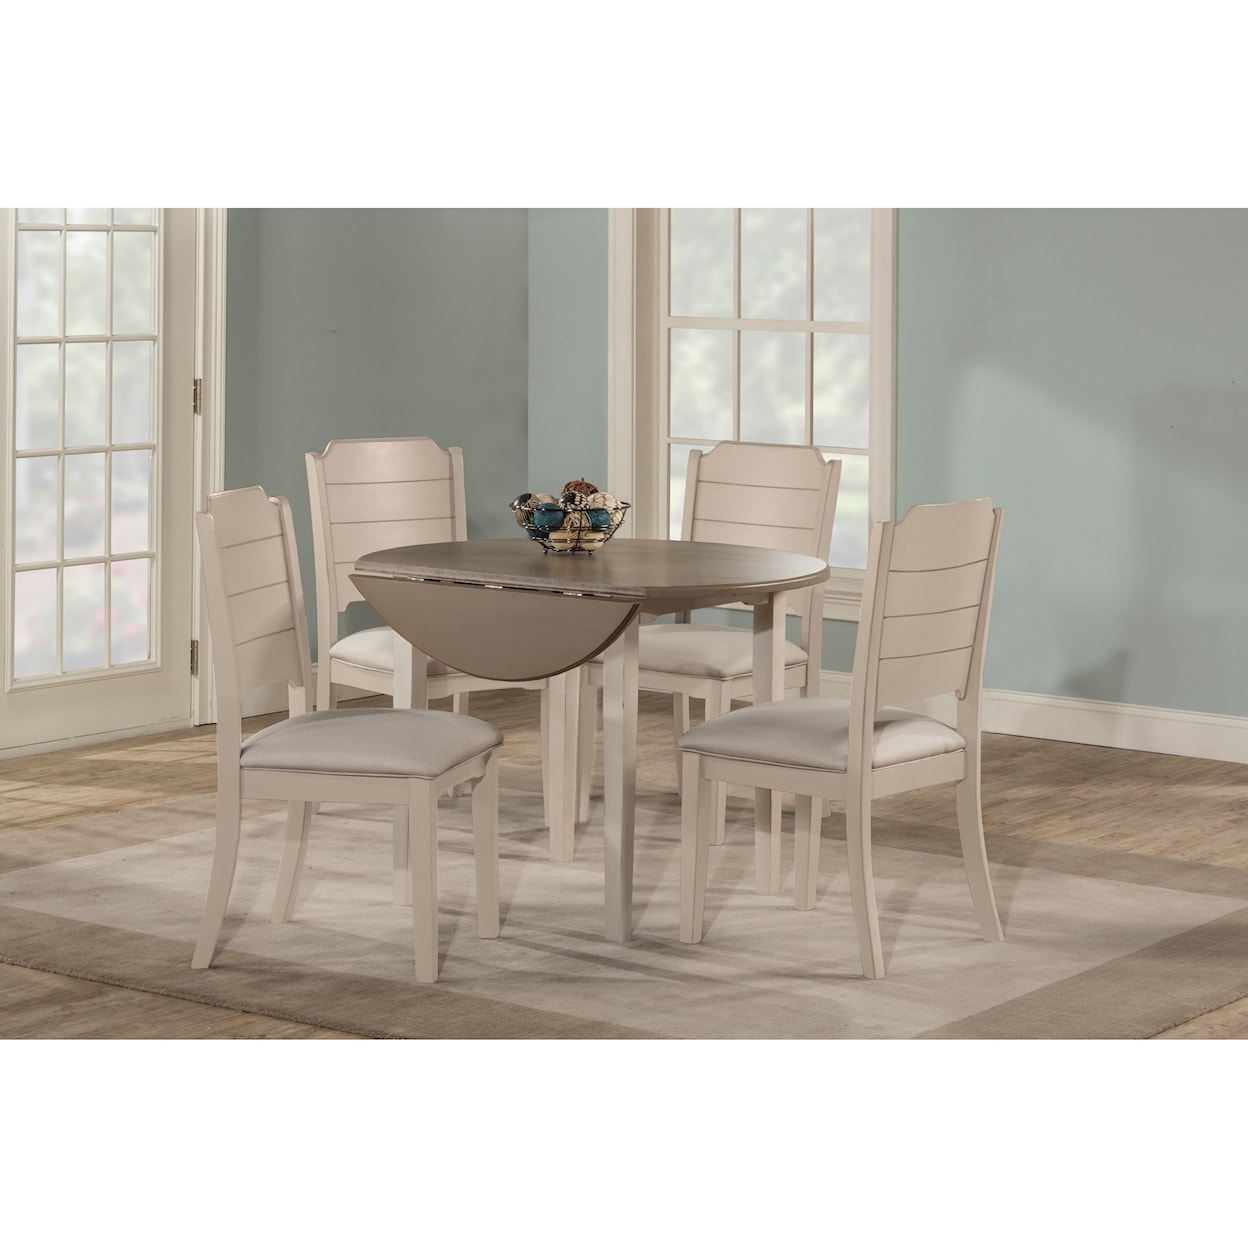 Hillsdale Clarion Round Drop Leaf Dining Table w/ Straight Leg